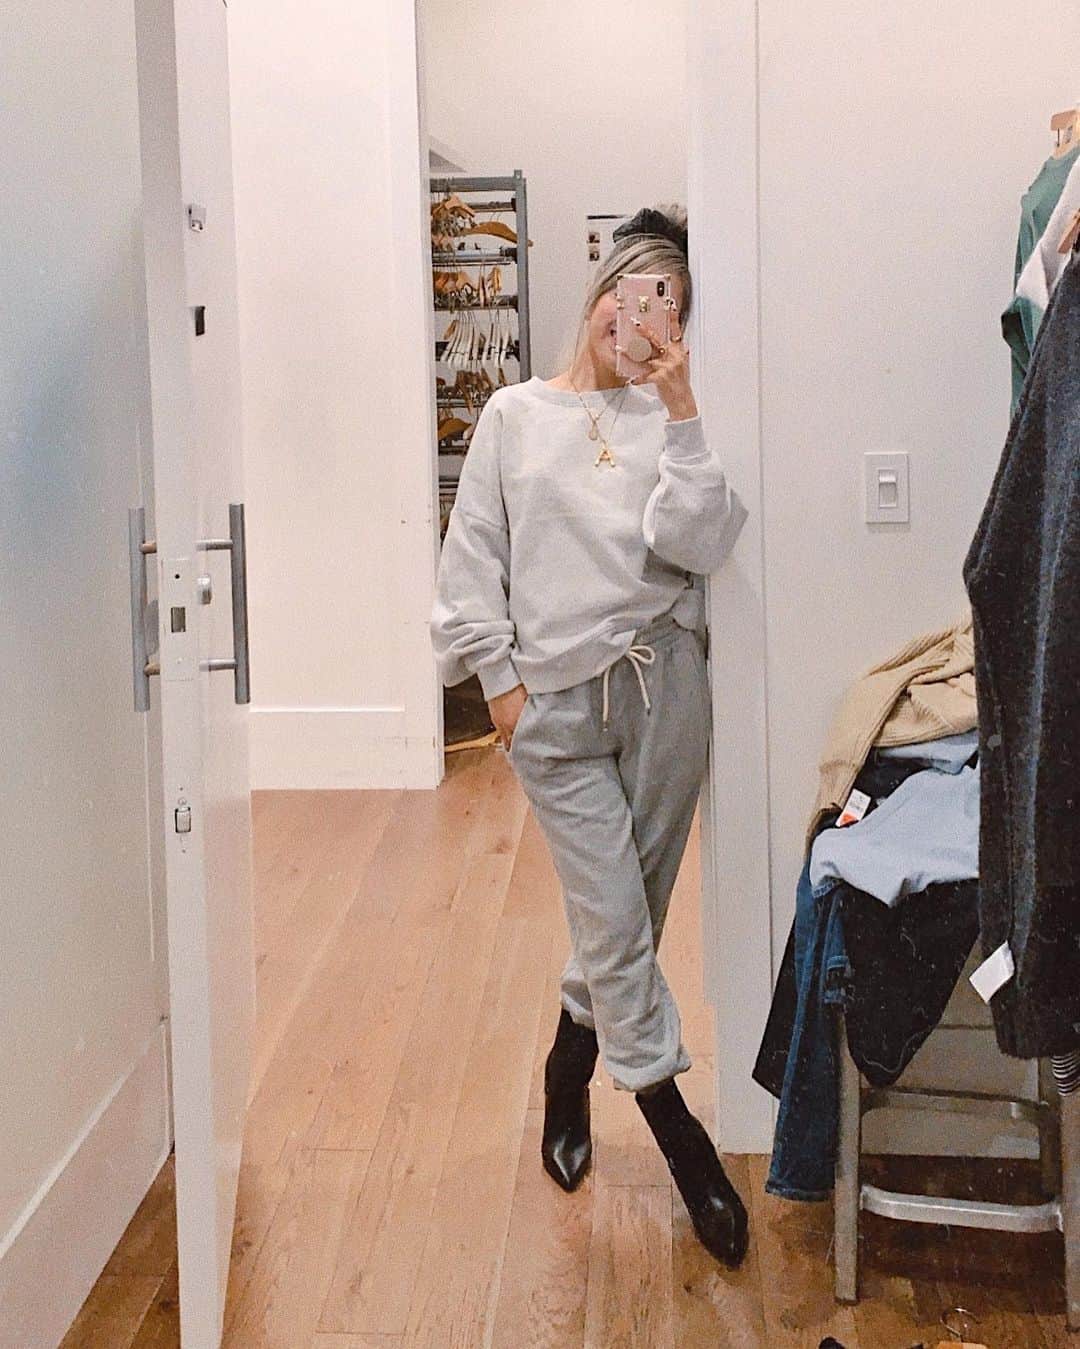 AikA♡ • 愛香 | JP Blogger • ブロガーさんのインスタグラム写真 - (AikA♡ • 愛香 | JP Blogger • ブロガーInstagram)「Casual mirror ootd in a fitting room 🐒 I've been living in this sweatshirt and sweat pants for the last week cuz they are so comfy and no shame at all 🤍 @gap ﻿ The shades of grays are slightly off from each other but I don’t care 🤷🏻‍♀️ Just make it work babyy 🤑 ﻿ Wore this look with my martens, leopard coat & the messiest bun + clear glasses for a movie last night 🎞🍿🥤( on my stories 👀 Also new few 🎌 words for you to learn!! ) Linked both on stories! The sweatshirt is currently for only $19.99 🙌🏻#whatasteal ﻿ ﻿ @theinvisiblemanmovie was sooo good 👏🏻✨ Have you guys watched!? 🎬 #theinvisibleman ﻿ ⋆ ⋆ ⋆ ⋆ ﻿ ﻿ 最近見つけたスウェットがめっちゃお気に入り🤍 @gap_jp ﻿ 上下少しだけ色違うけど、気にしない〜🤷🏻‍♀️🤑﻿ 自分が可愛い❣️って直感したらGETして﻿ おしゃれに着こなせちゃえば良いの🙈w﻿ 昨日ゎこの上下に﻿ マーチン + ヒョウ柄のコート + メッシーバン +﻿ クリアの伊達眼鏡で友達と映画ナイト🎞🍿🥤﻿ ストーリーズ載せたょ🖤 日本のサイトでトップスゎ同じにのなかったけど﻿ スエットゎ同じのあったから﻿ ハイライトの【SHOP】に保存してあるよ！﻿ ﻿ #透明人間 めっちゃ面白かったぁぁ👏🏻✨ ﻿ 日本ゎ5／1から公開だって🎬 ﻿ 5分に一回ビク！！ってなった🤣﻿ -﻿ #gap #sweatpants #comfyoutfit #mirrorselfies #fittingroomselfie #petitefashion #おちびコーデ」3月2日 12時30分 - aikaslovecloset